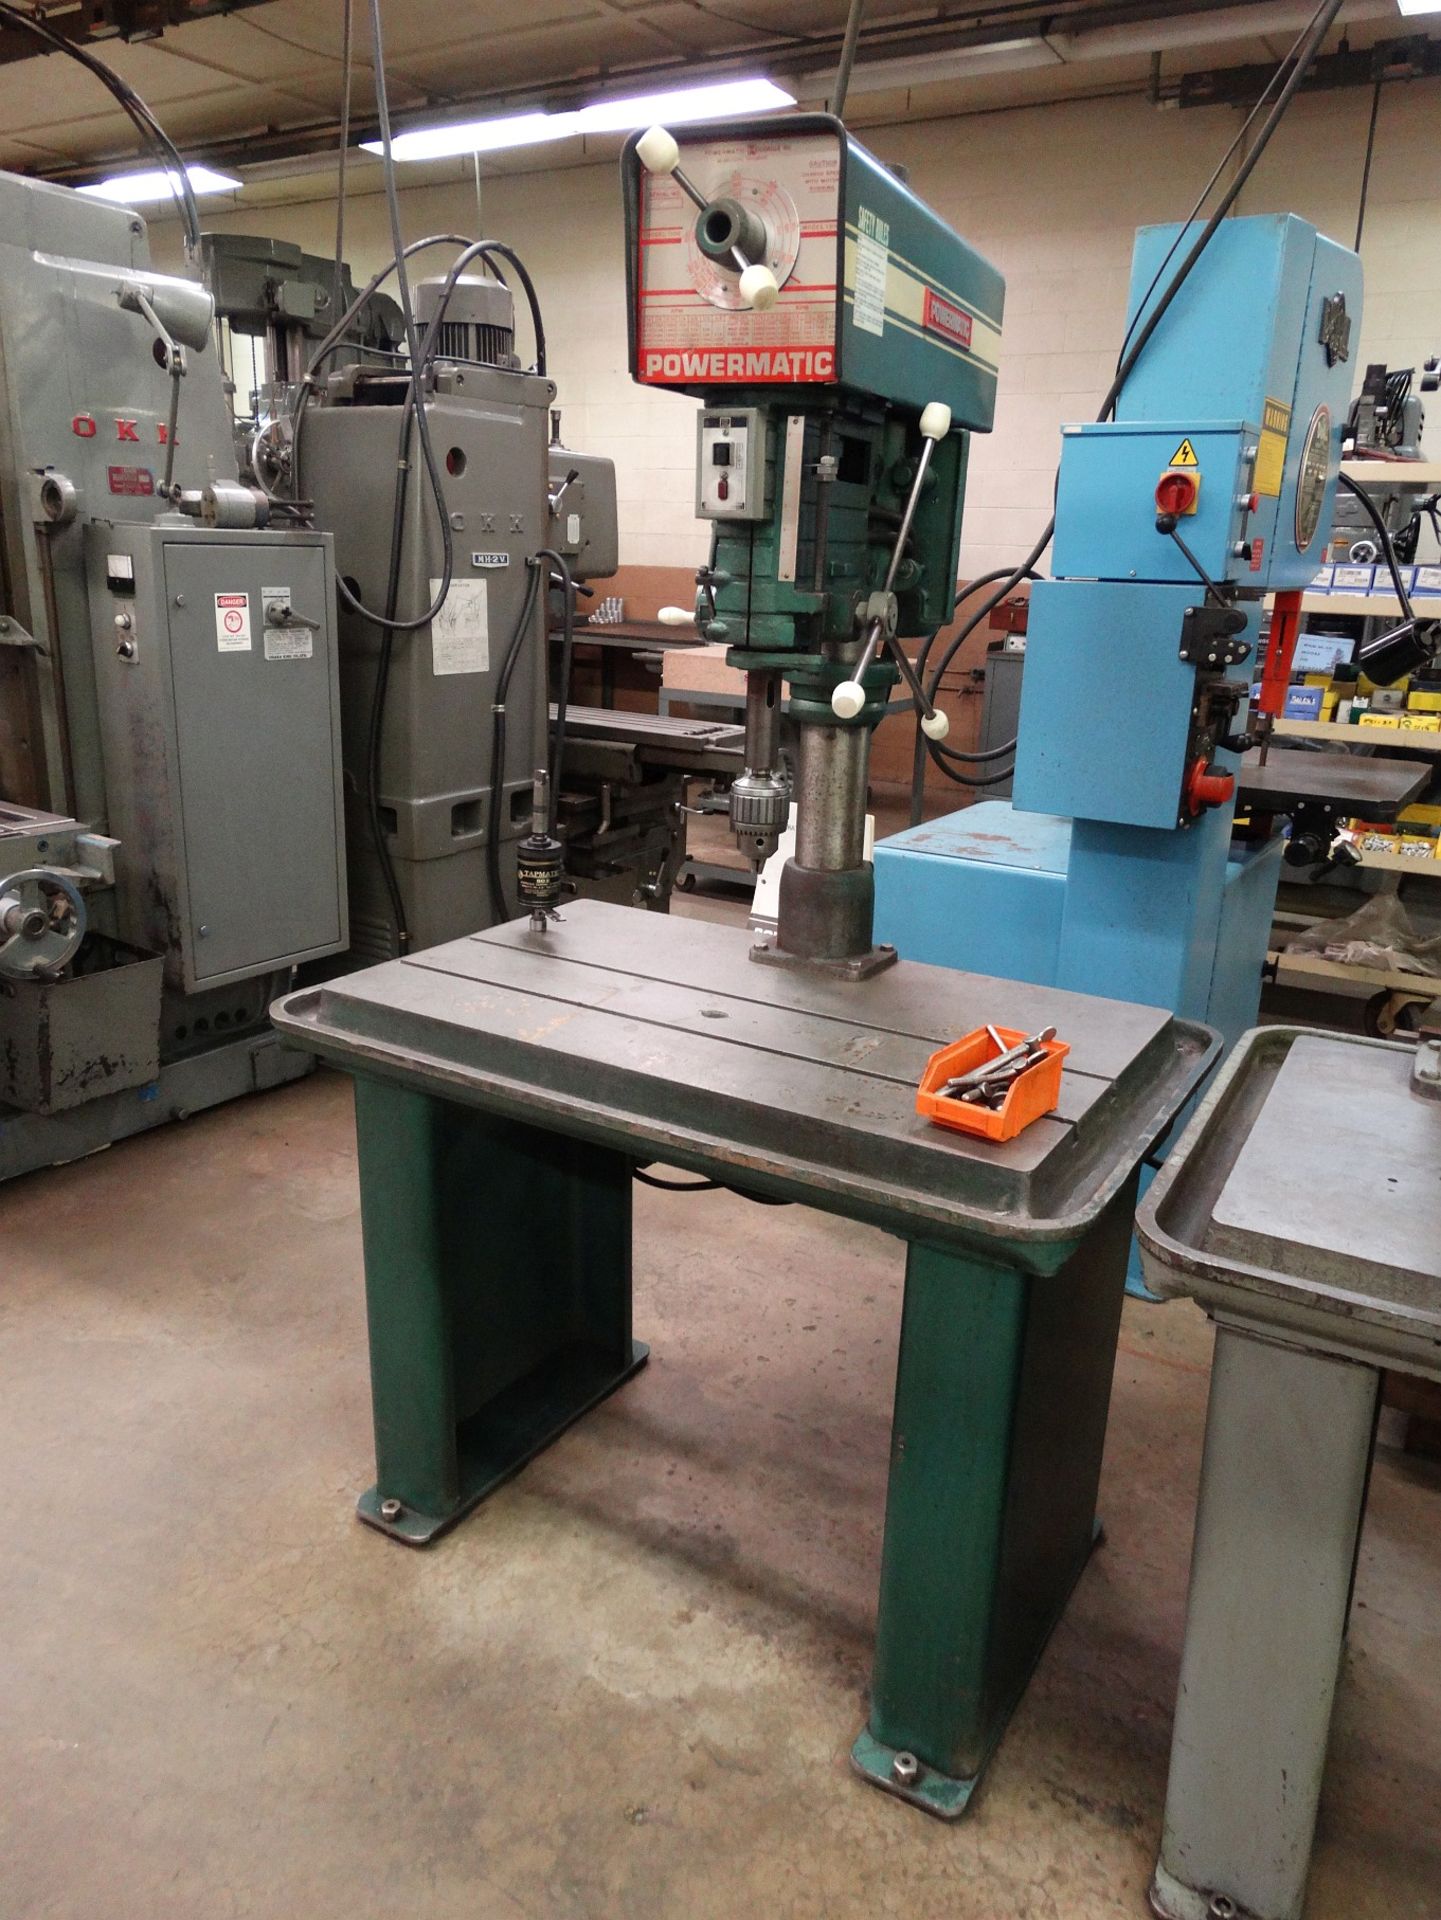 Powermatic Drill Press, Mdl 1200, 24" x 40" Table, 20", Variable Speed, SN 7920V084 - Image 2 of 2